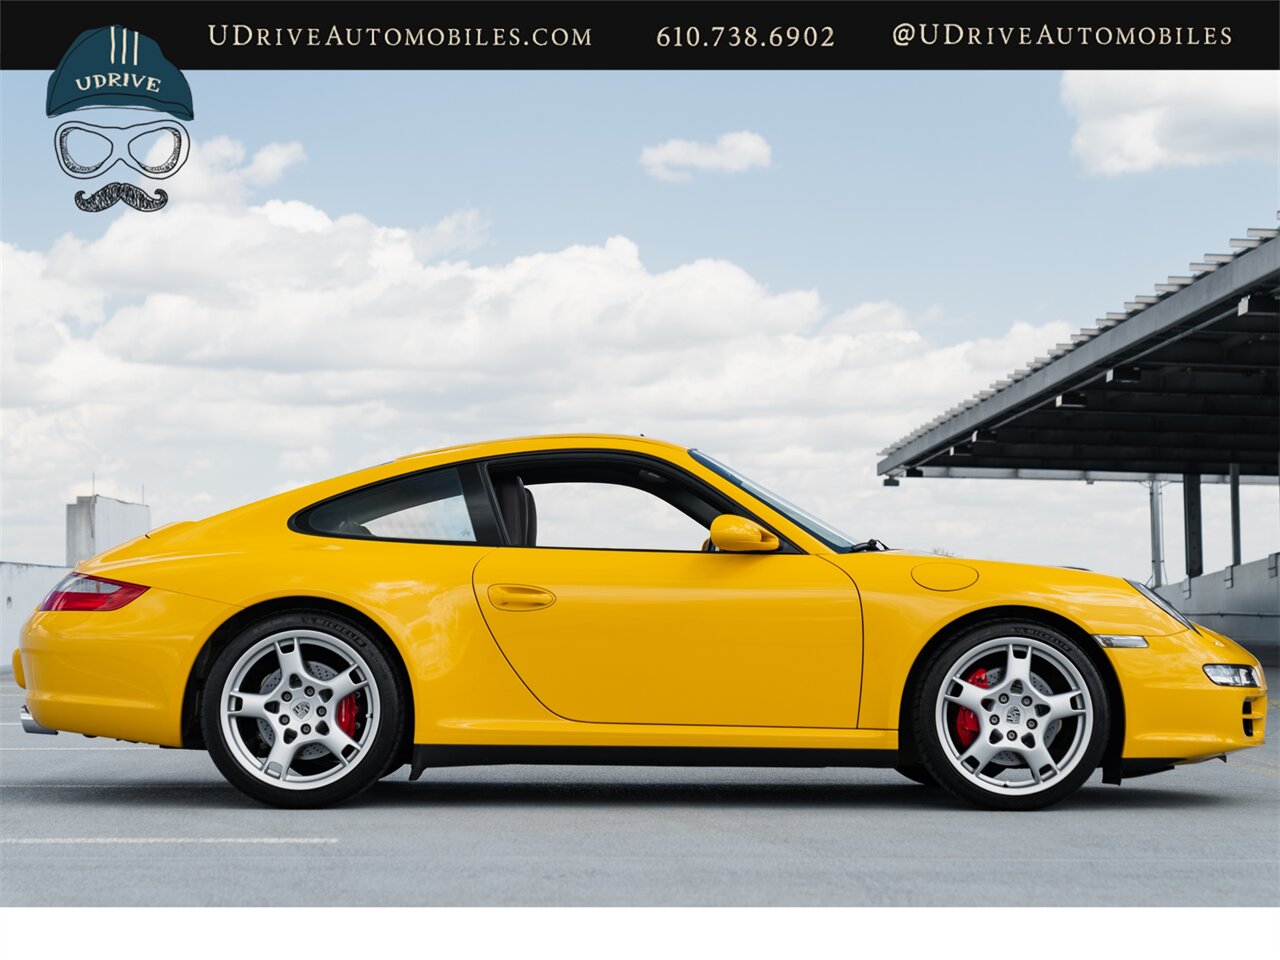 2006 Porsche 911 Carrera 4S  997 C4S 6 Speed Cocoa Full Lthr Chrono Sport Exhaust Special Color Combo - Photo 17 - West Chester, PA 19382